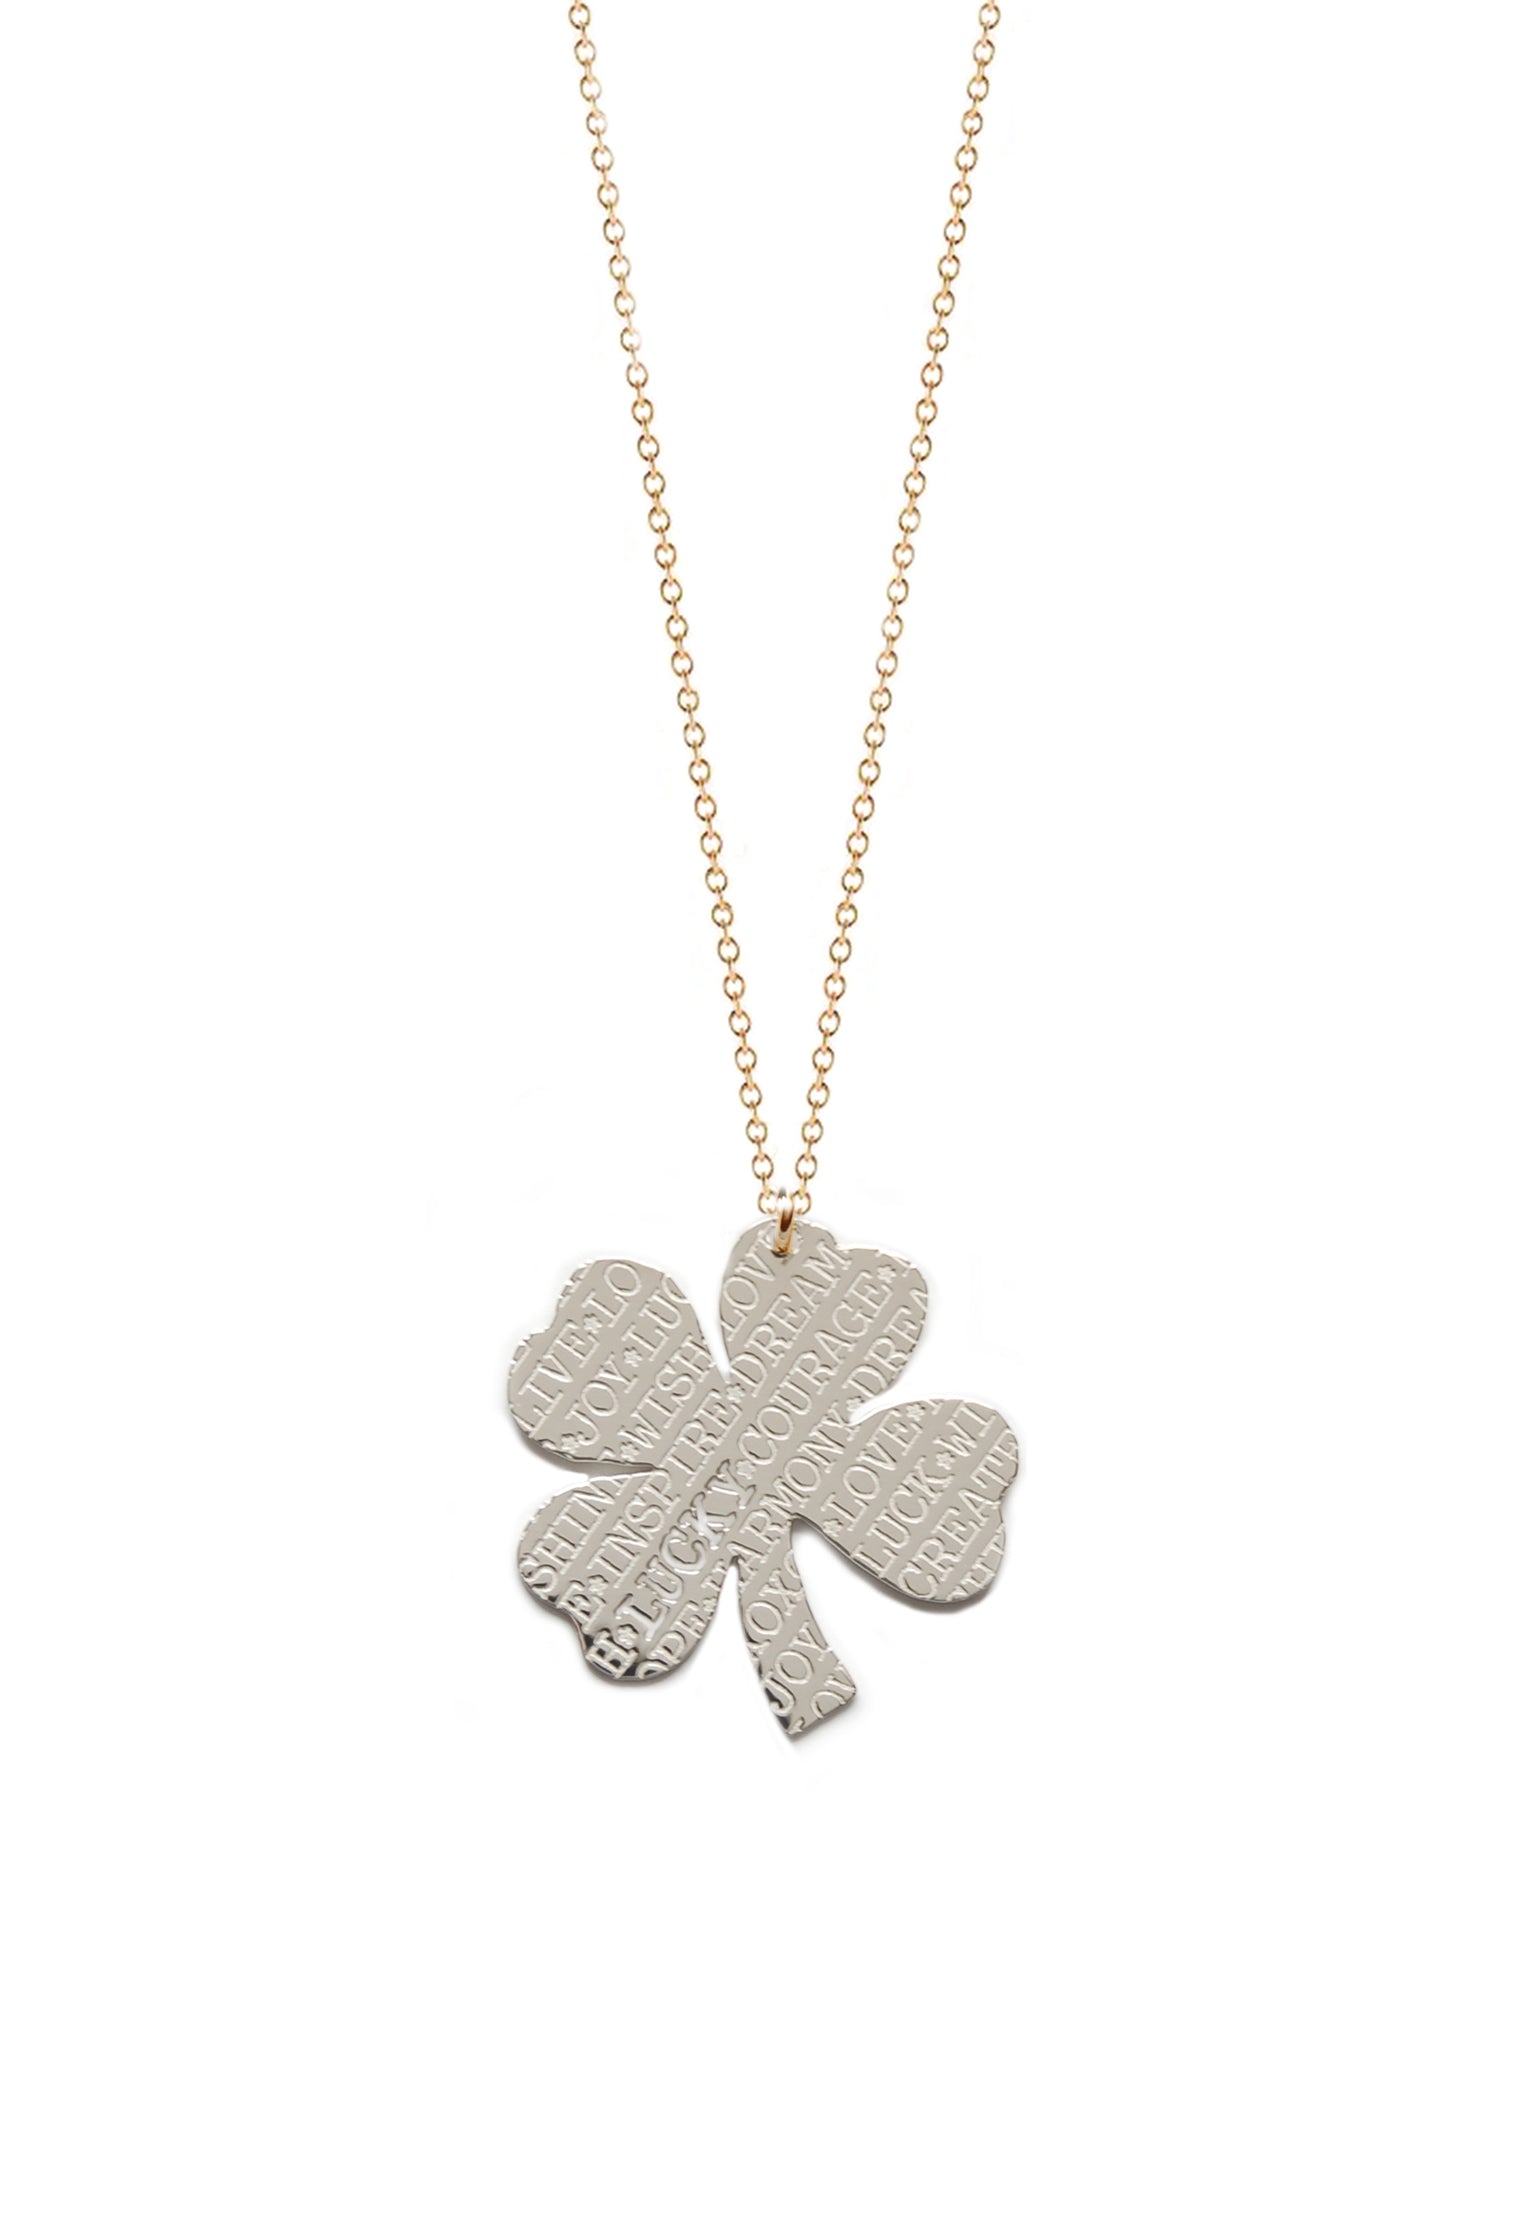 Iconic Lucky Clover Necklace 9 Clovers 90 cm - Just Franky